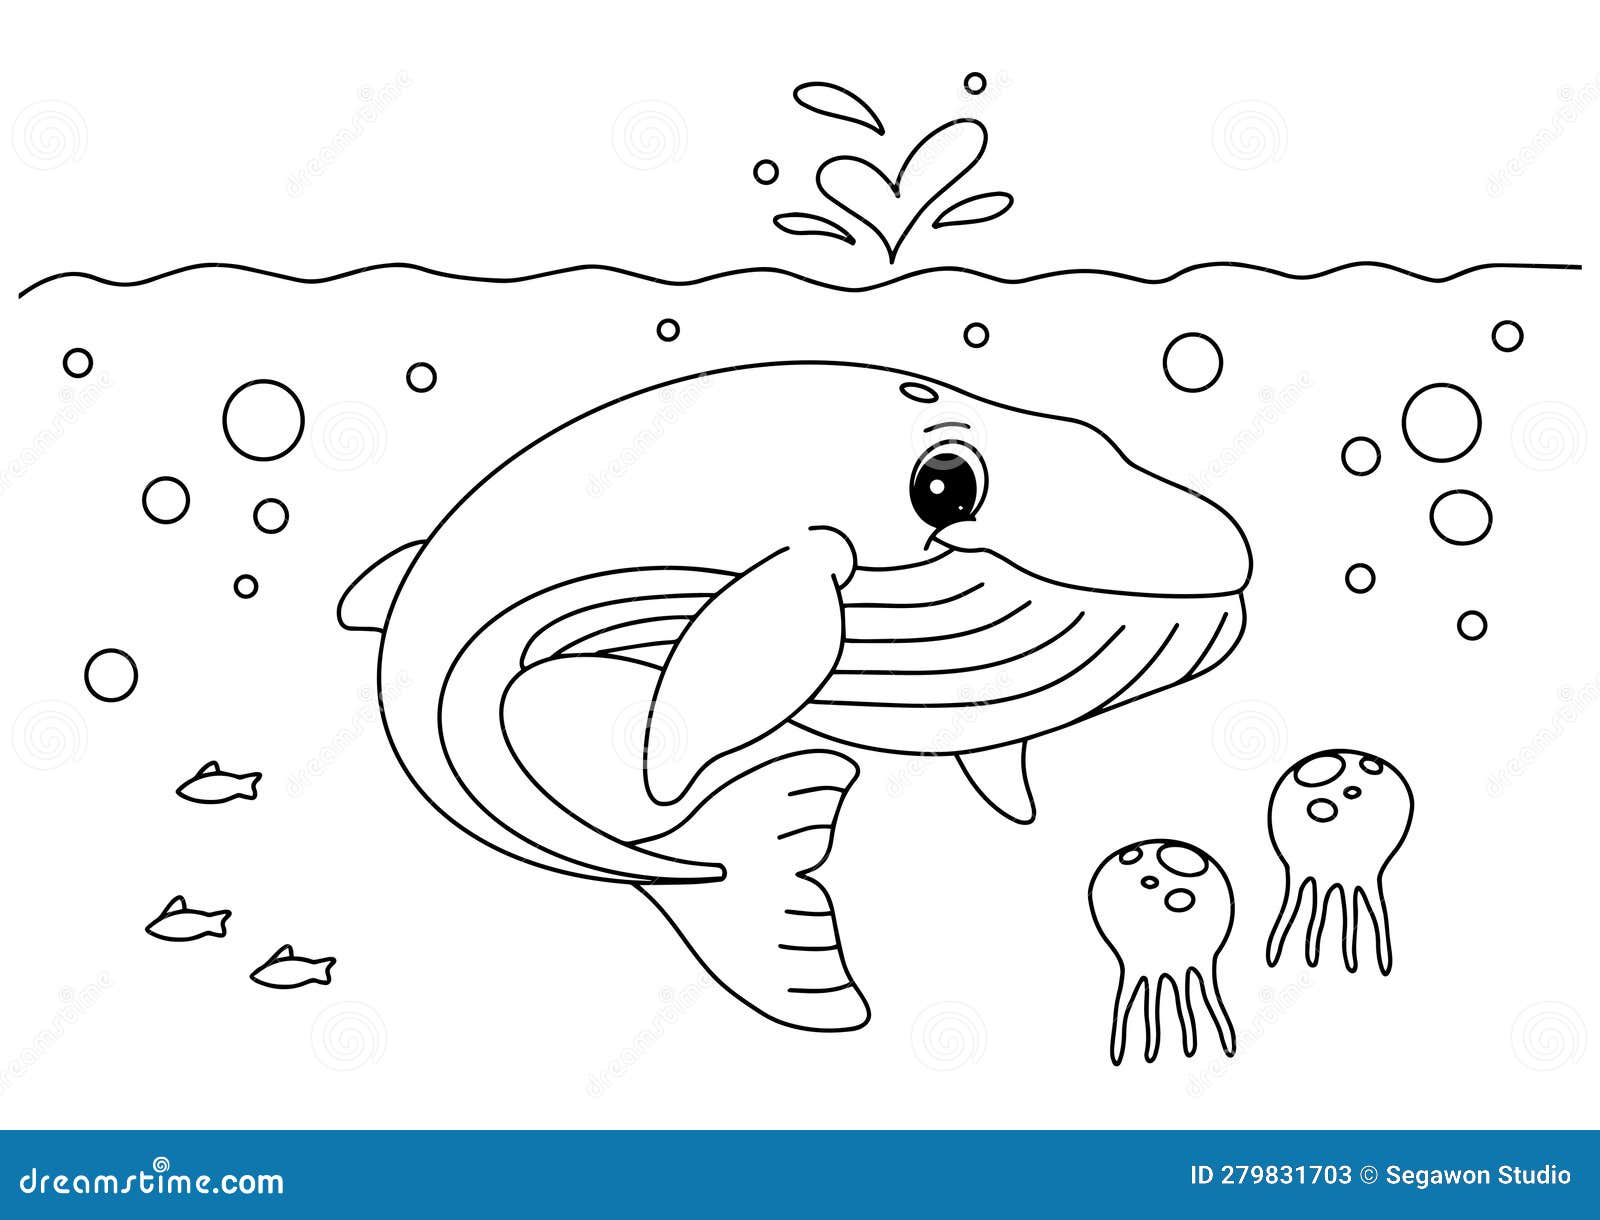 Children Coloring Book Page Big Whale Under Sea Nature Stock Vector ...